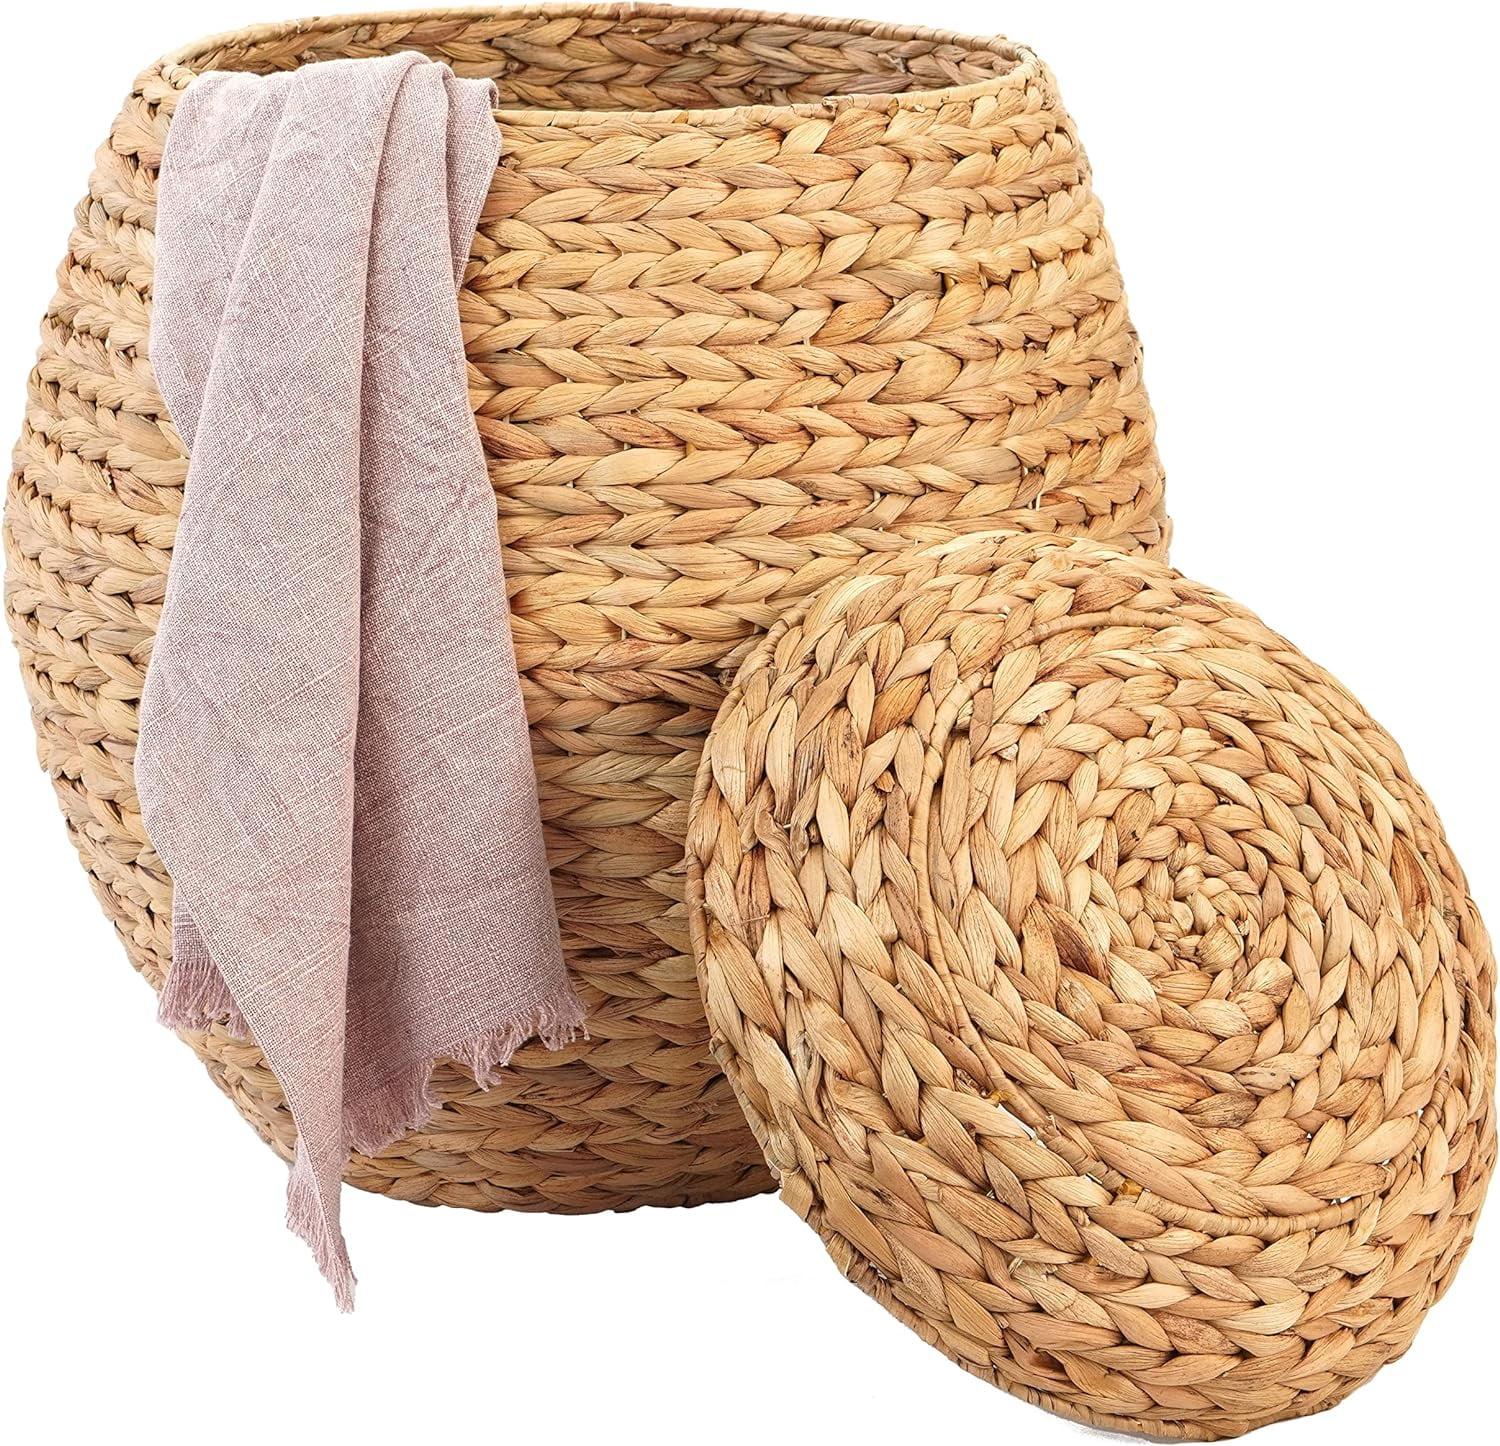 Natural Water Hyacinth 19.5" Round Wicker Storage Ottoman with Lid